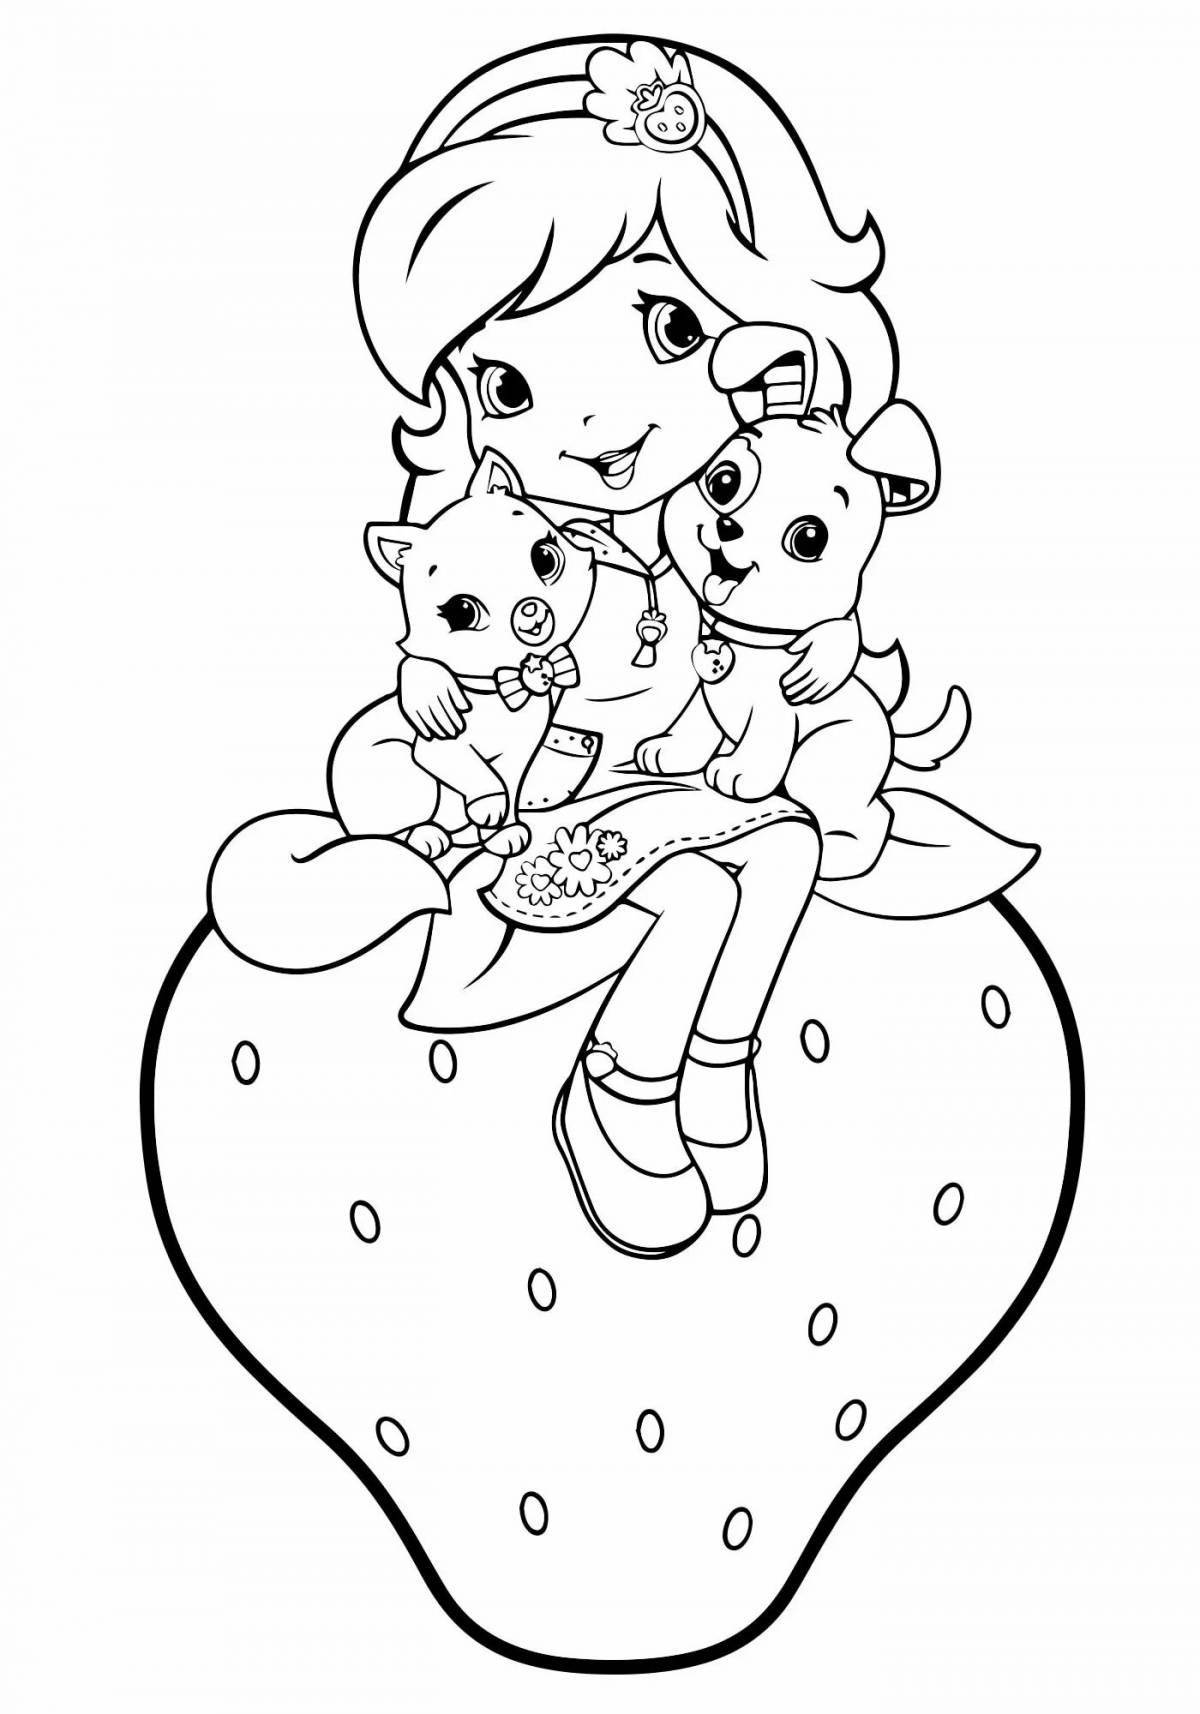 Coloring pages for girls 6 years old